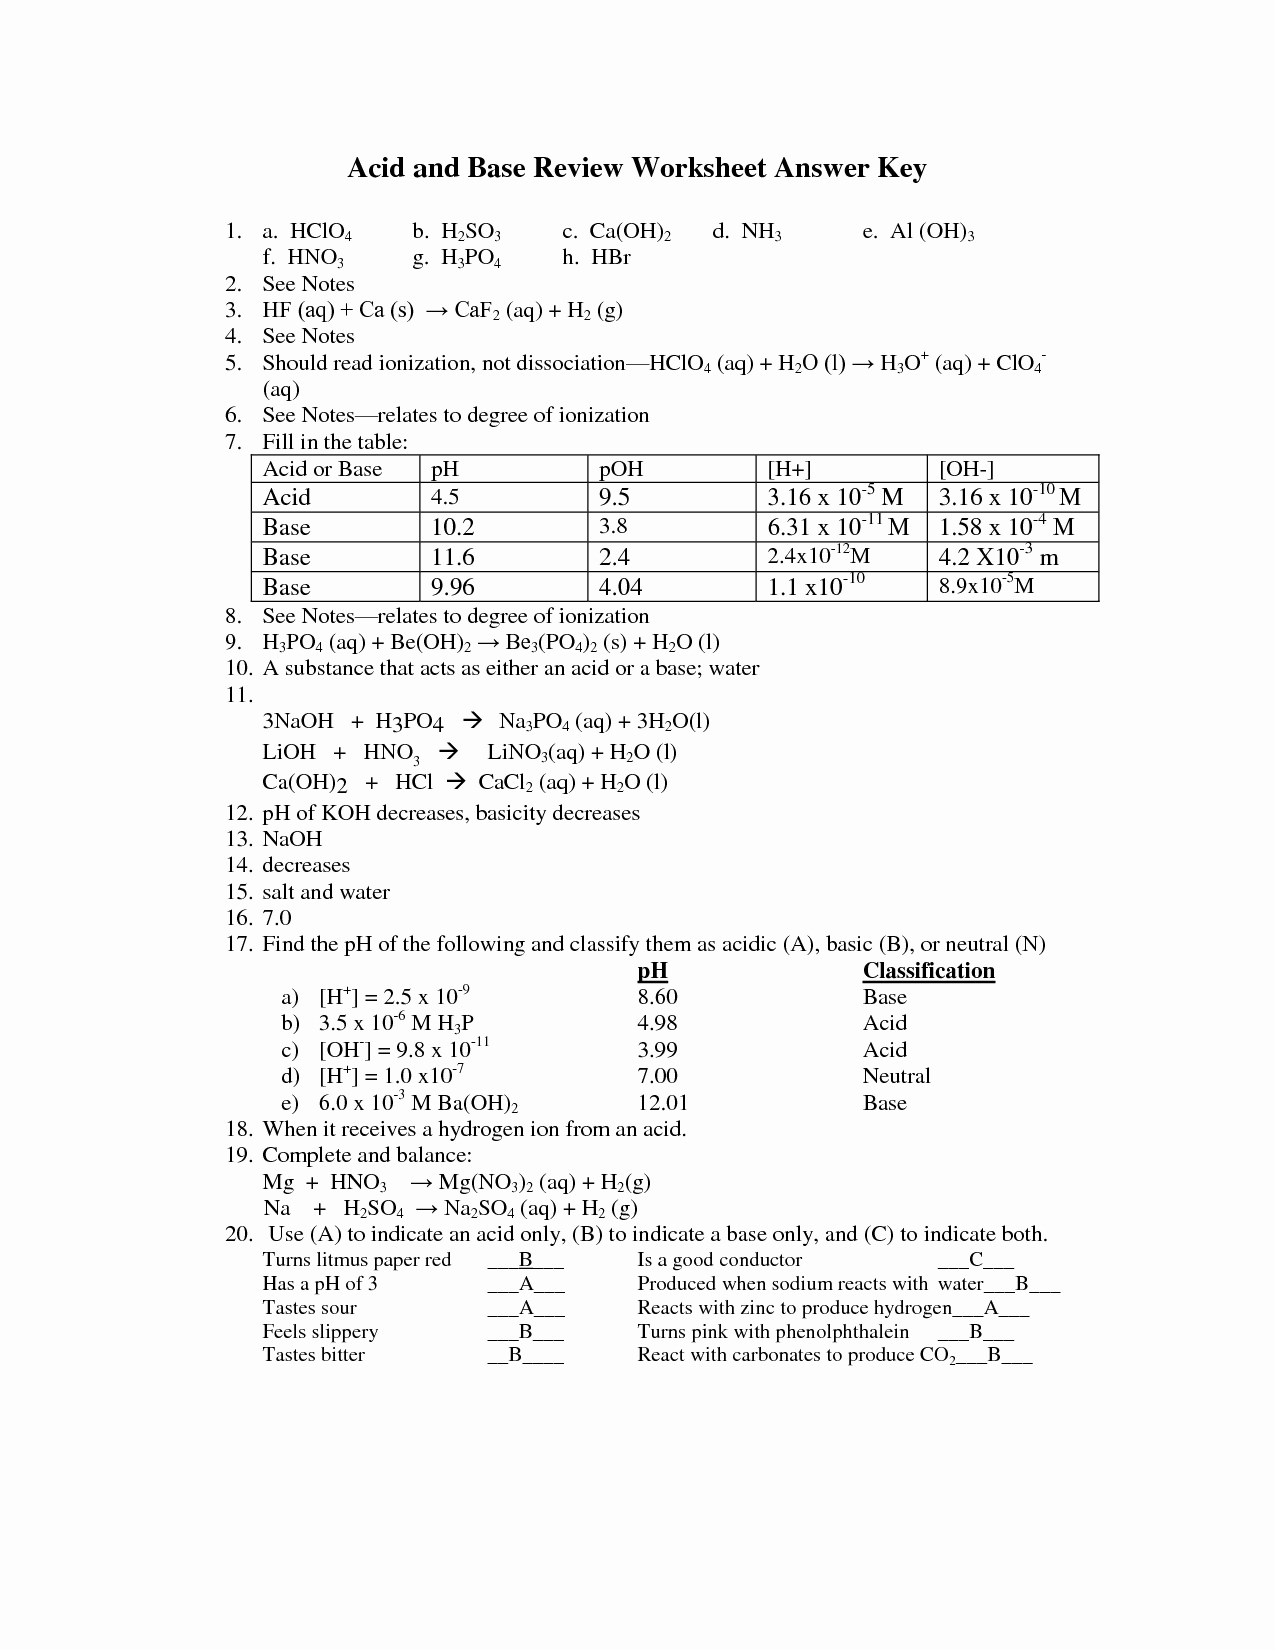 Acid and Bases Worksheet Answers Best Of 12 Best Of Acid Rain and Ph Worksheet Answers